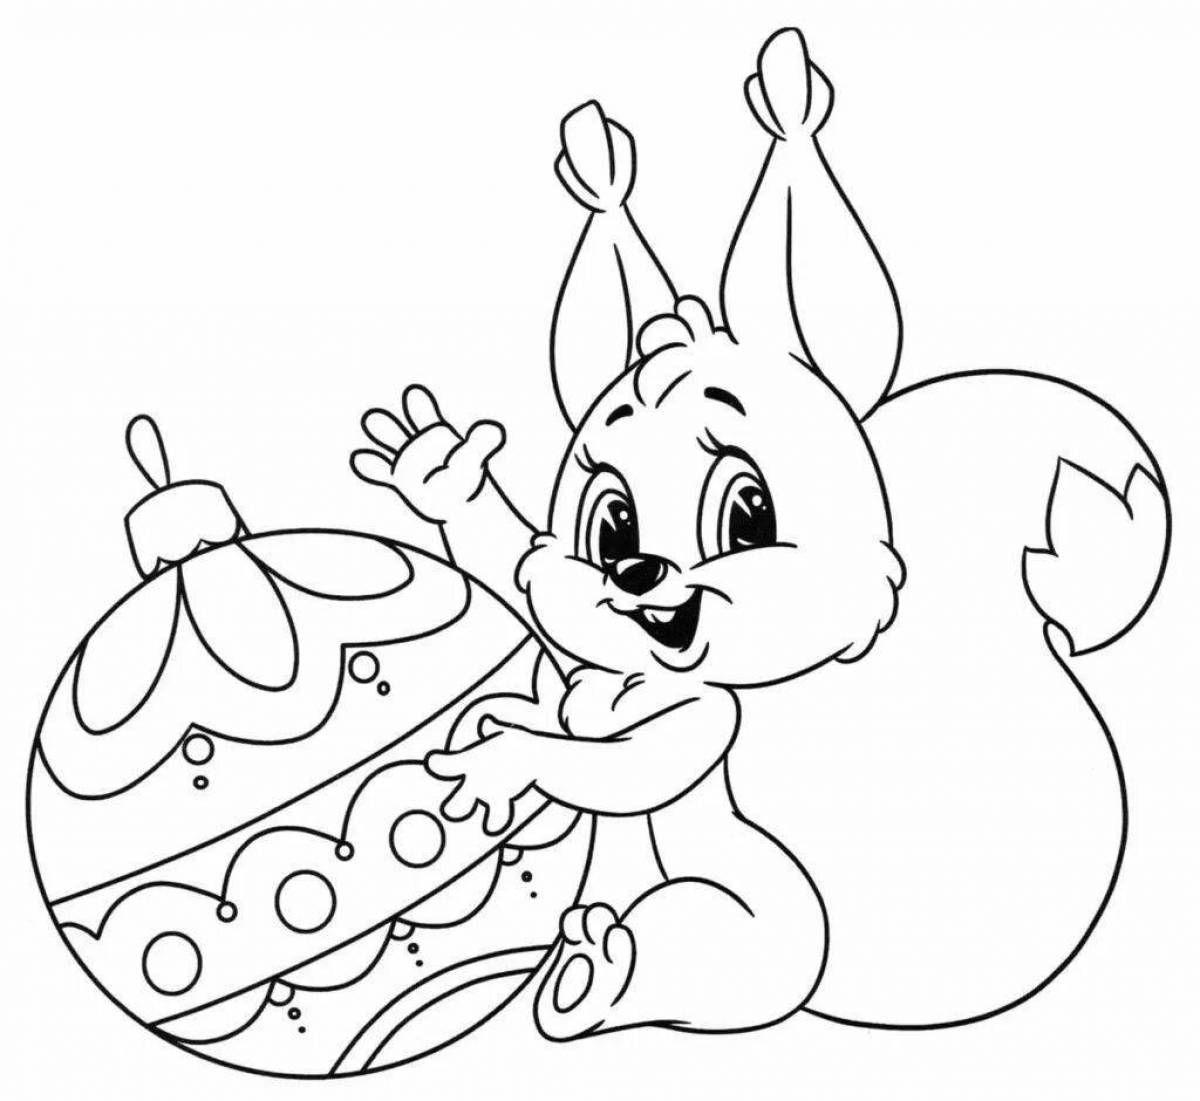 Funny rabbit new year 2023 coloring book